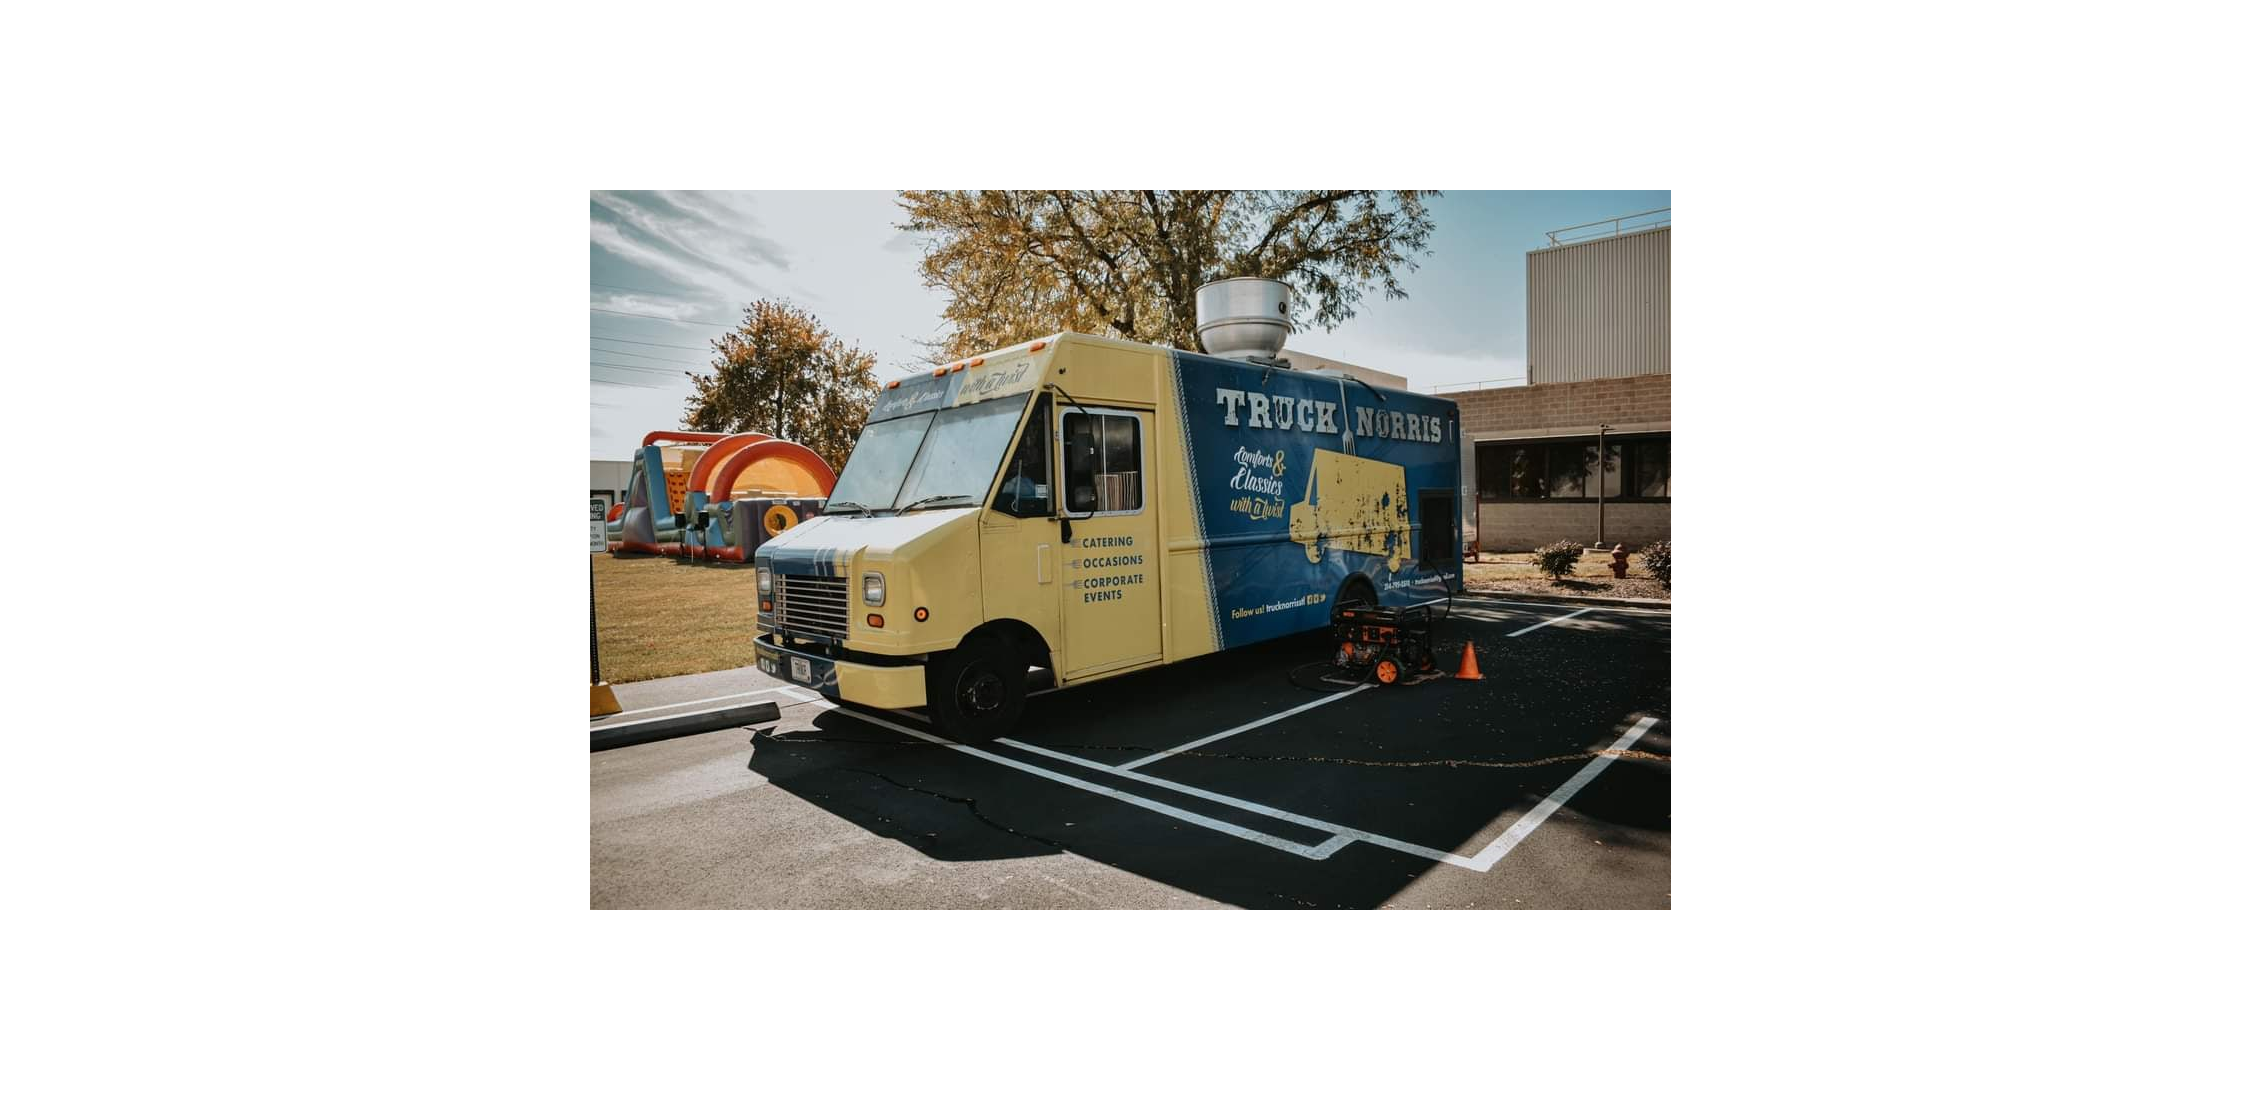 Comforts & Classics With a Twist - Truck Norris